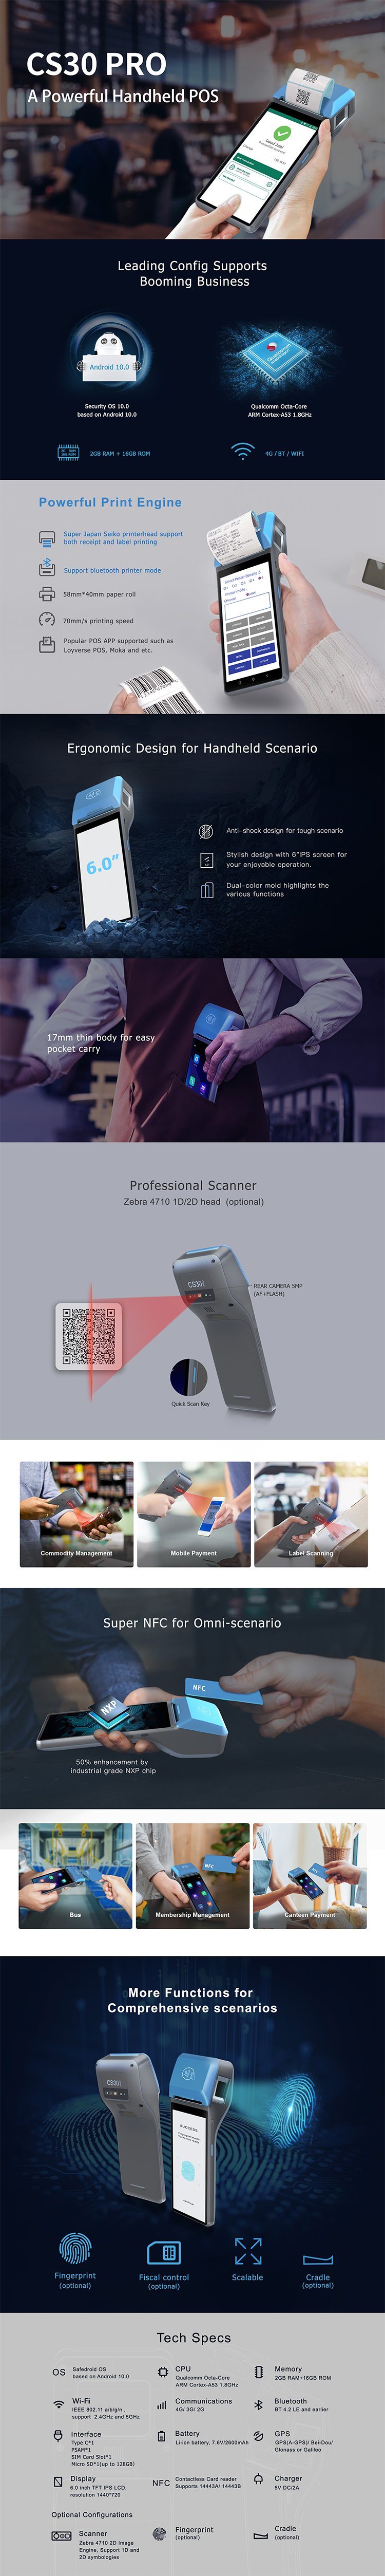 All in One Handheld Android Payment POS Machine